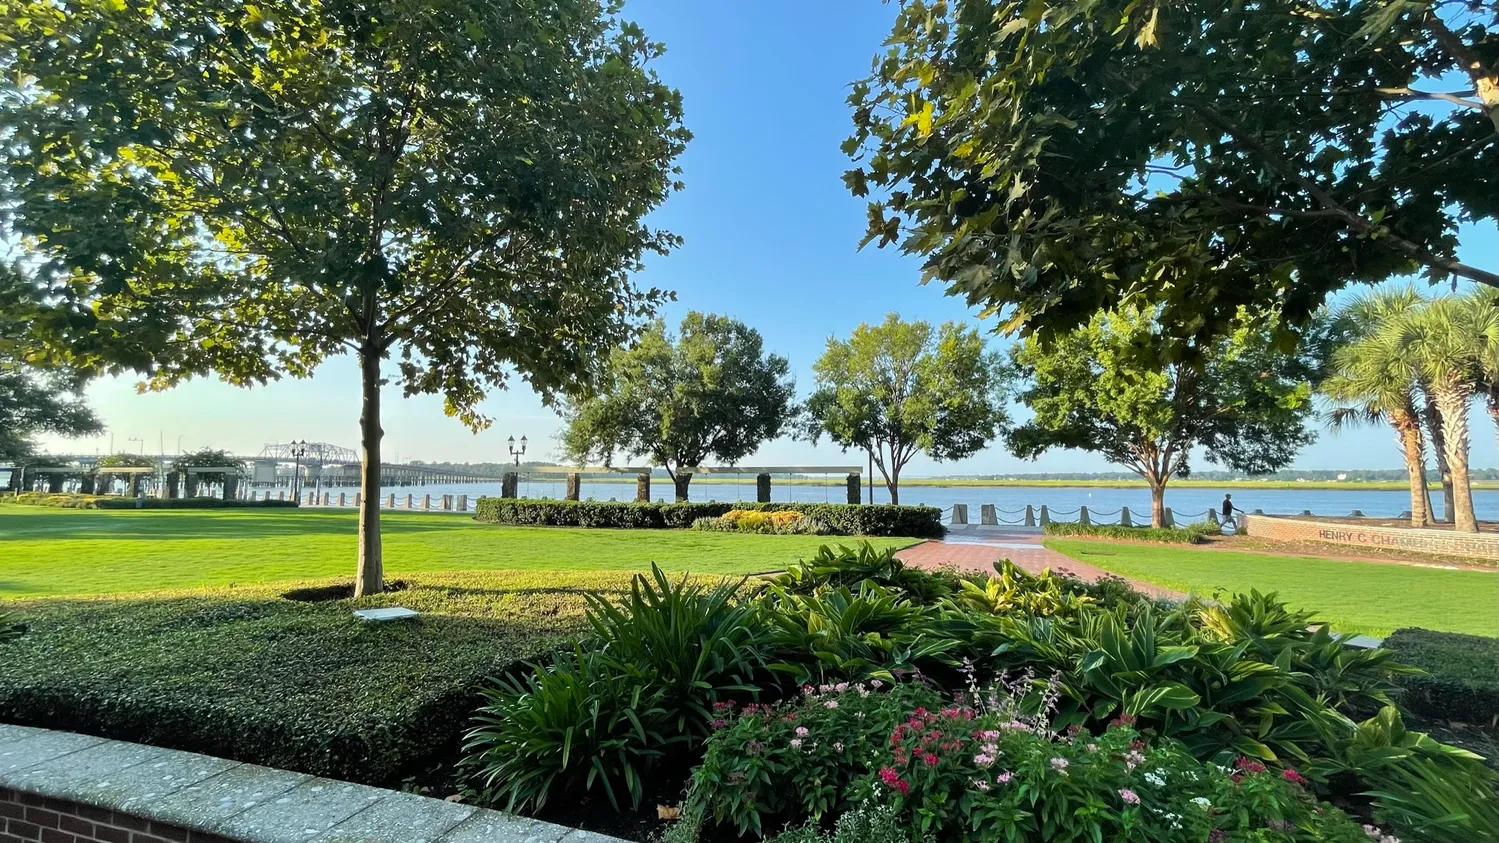 Explore Downtown Beaufort and Henry C. Chambers Waterfront Park